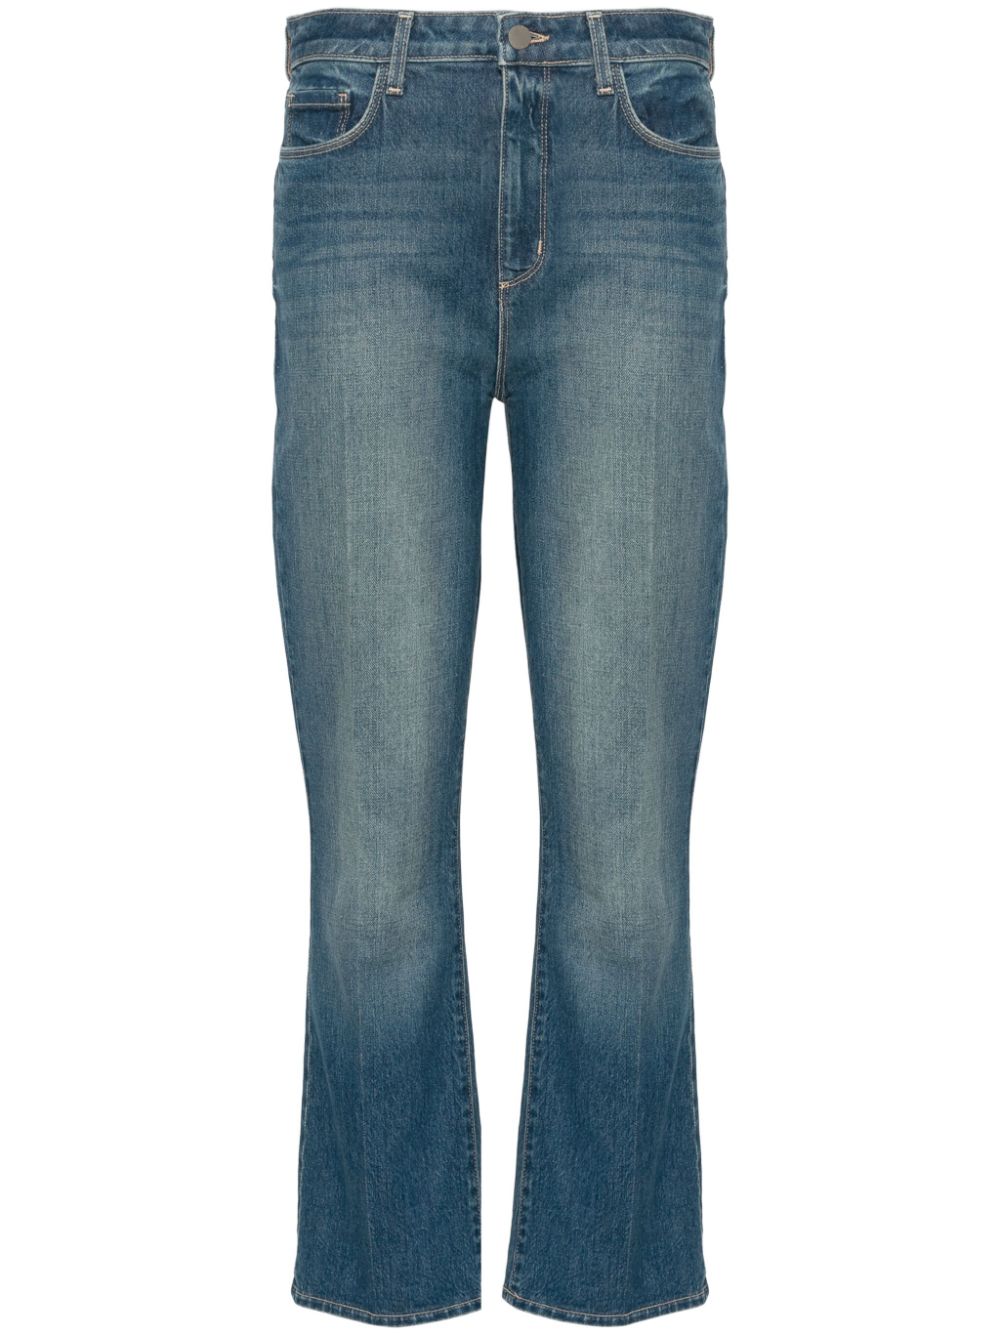 L'Agence high-rise bootcut jeans - Blue von L'Agence